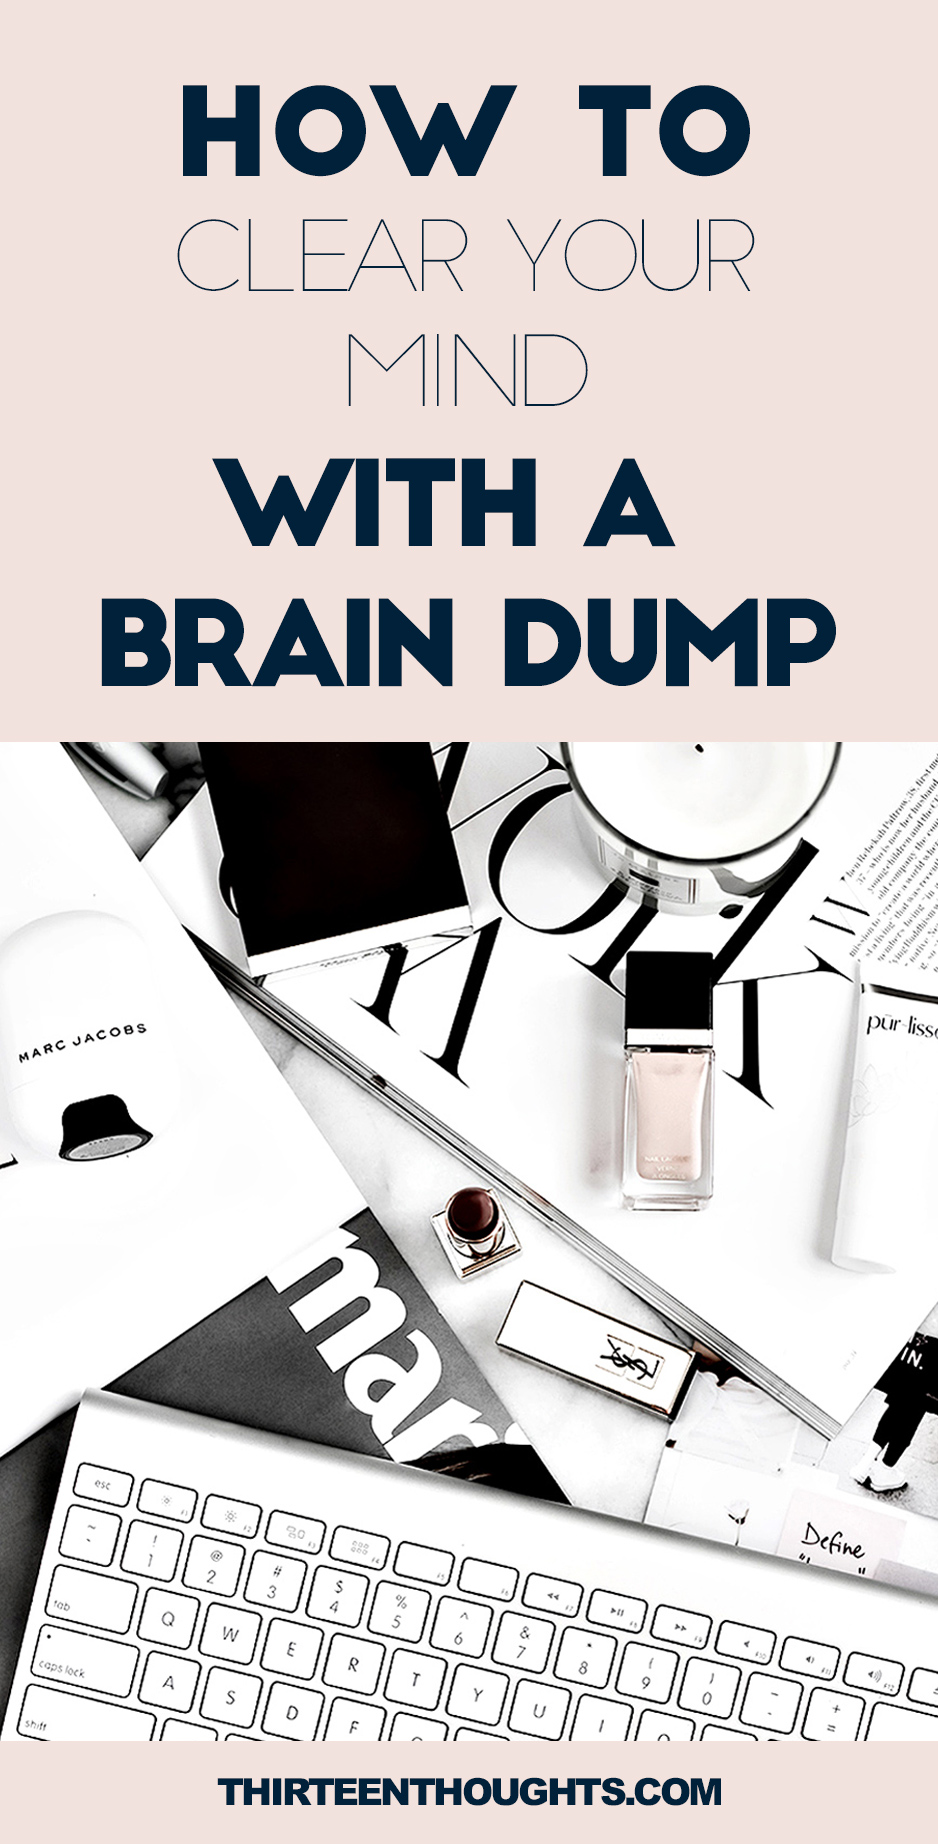 How to Clear Your Mind with a Brain Dump